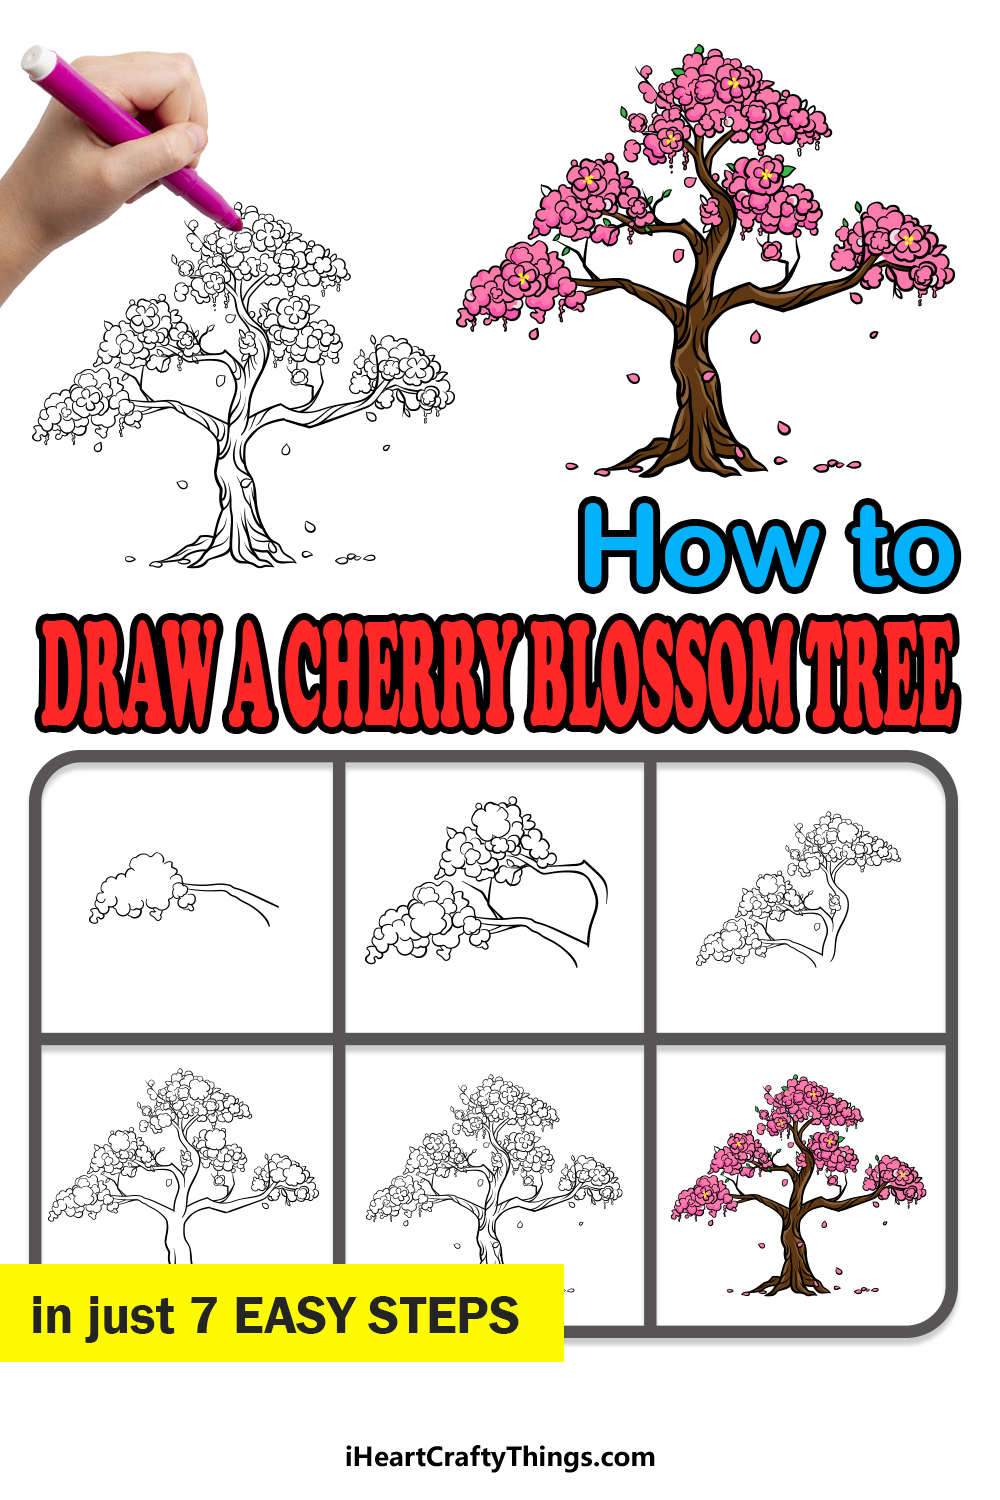 how to draw a cherry blossom tree in 7 easy steps